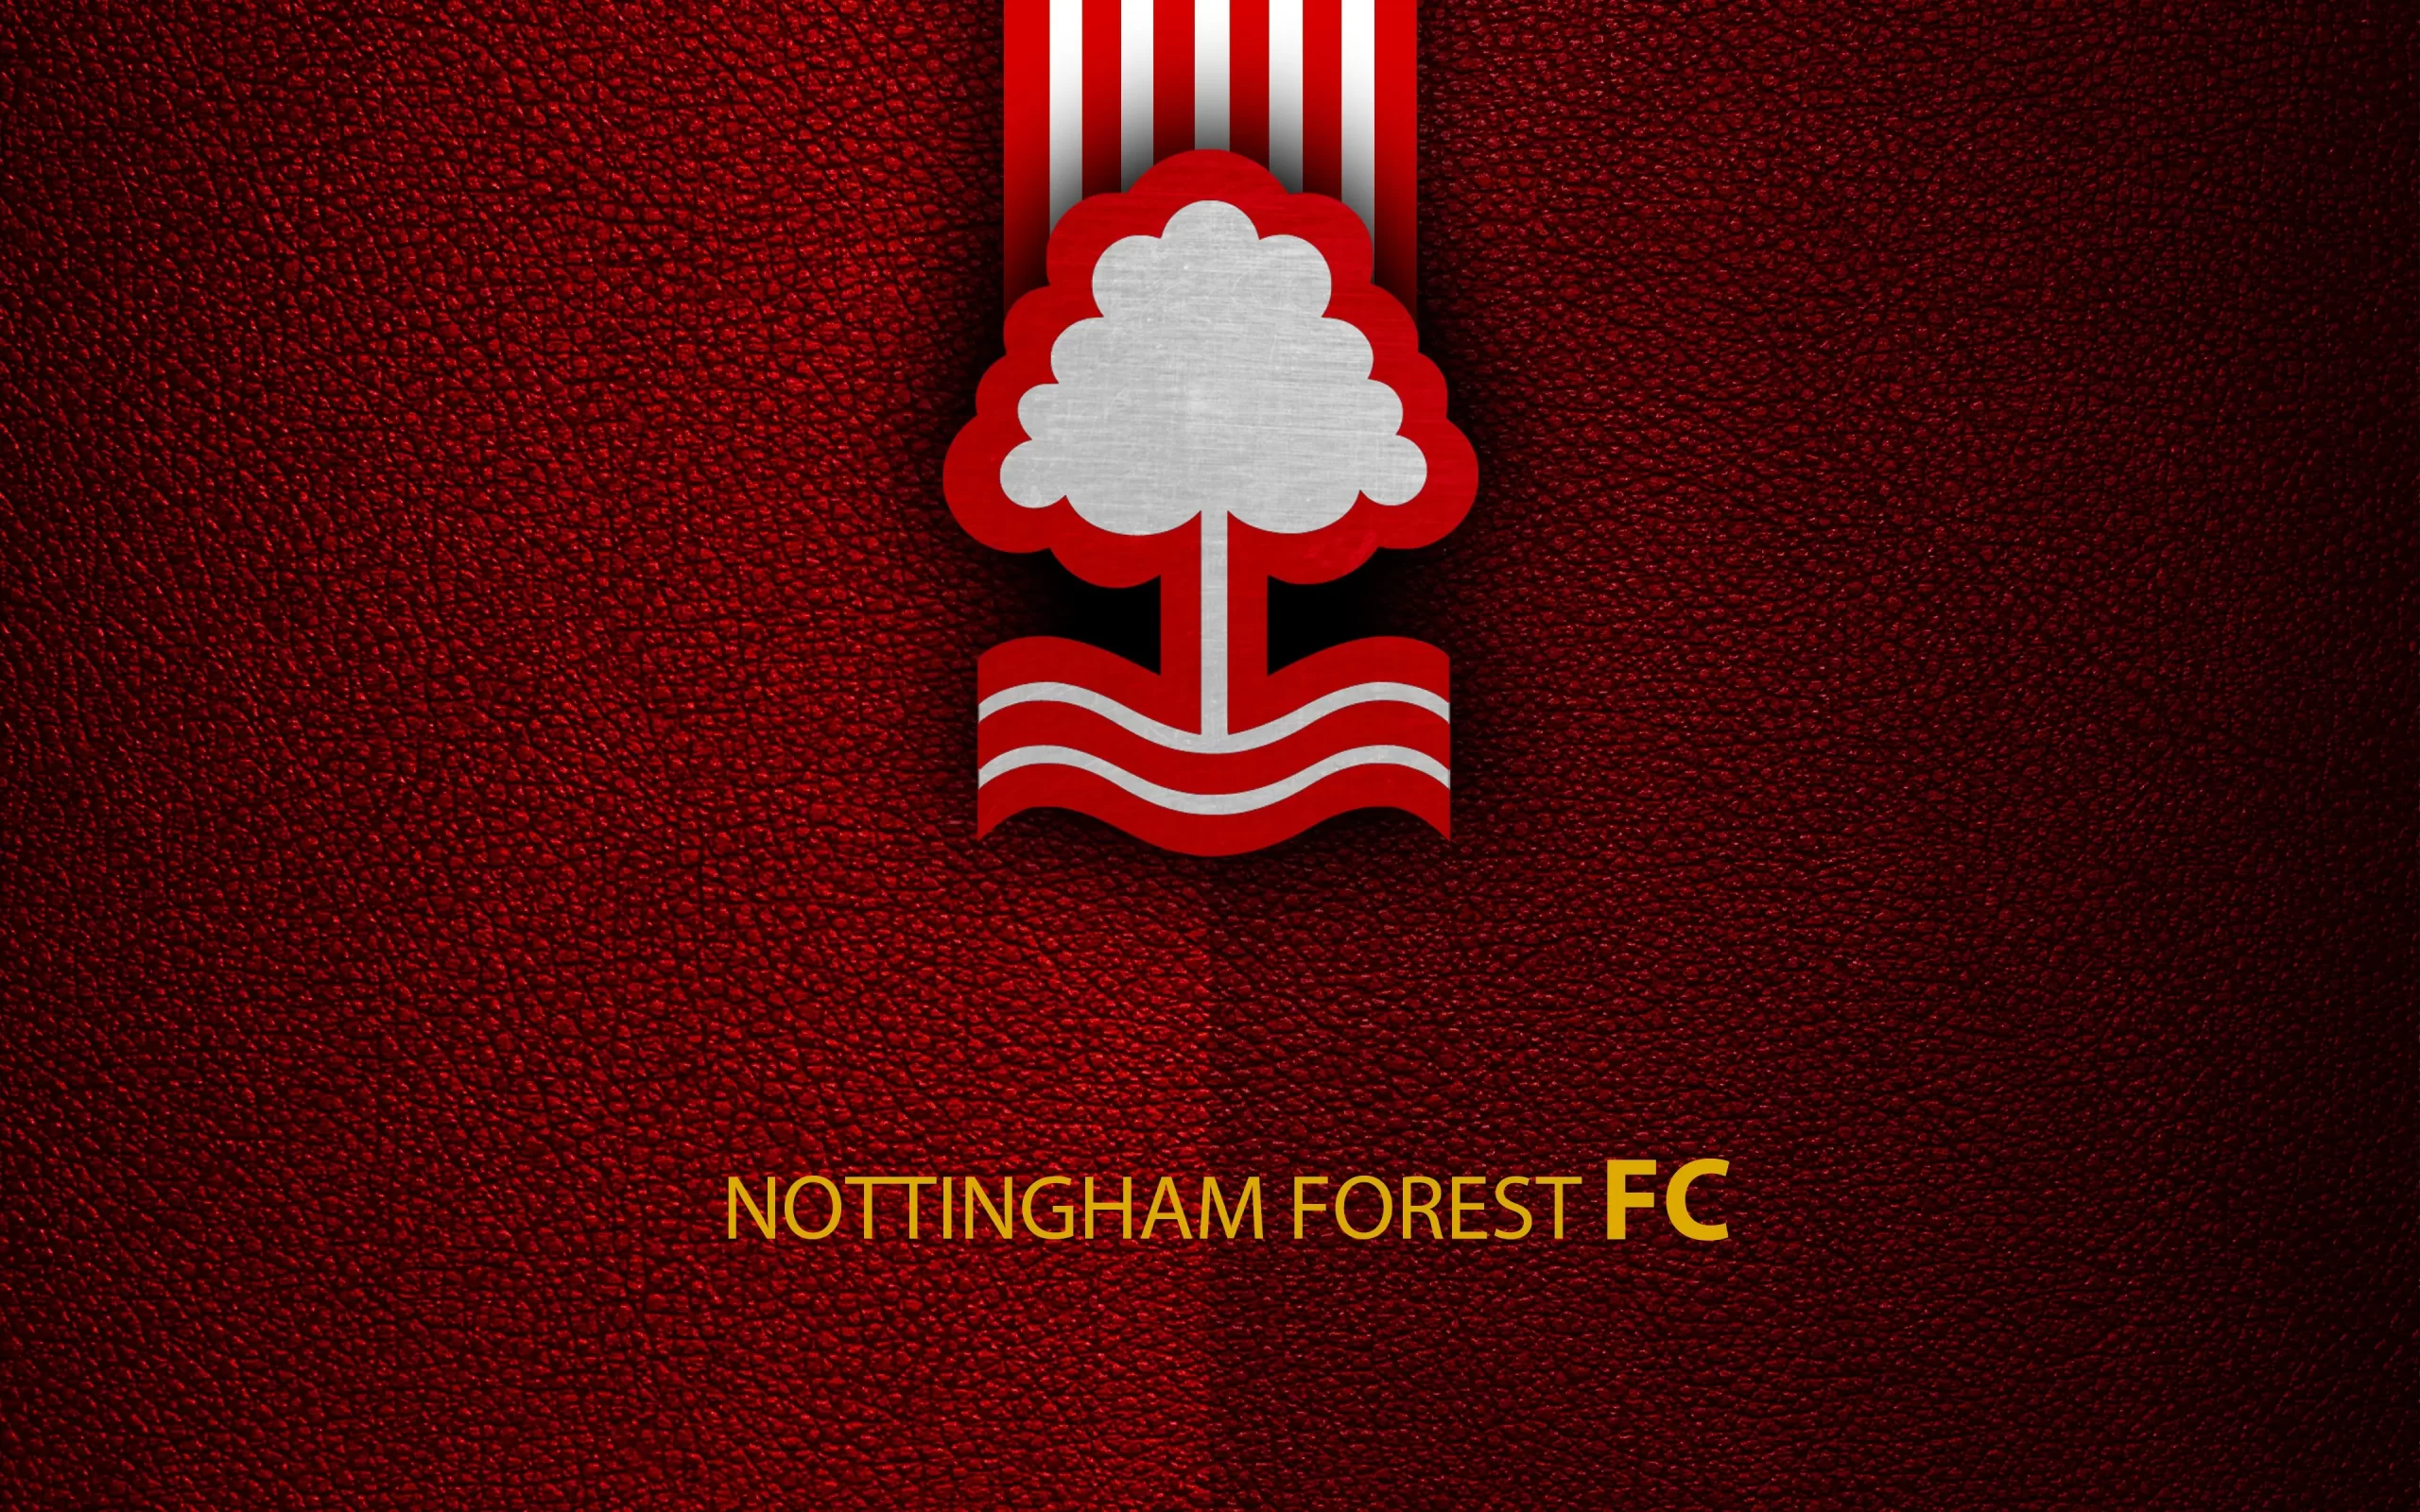 Nottingham Forest FC being handed a 4-point deduction after breaching the Premier League's financial rules